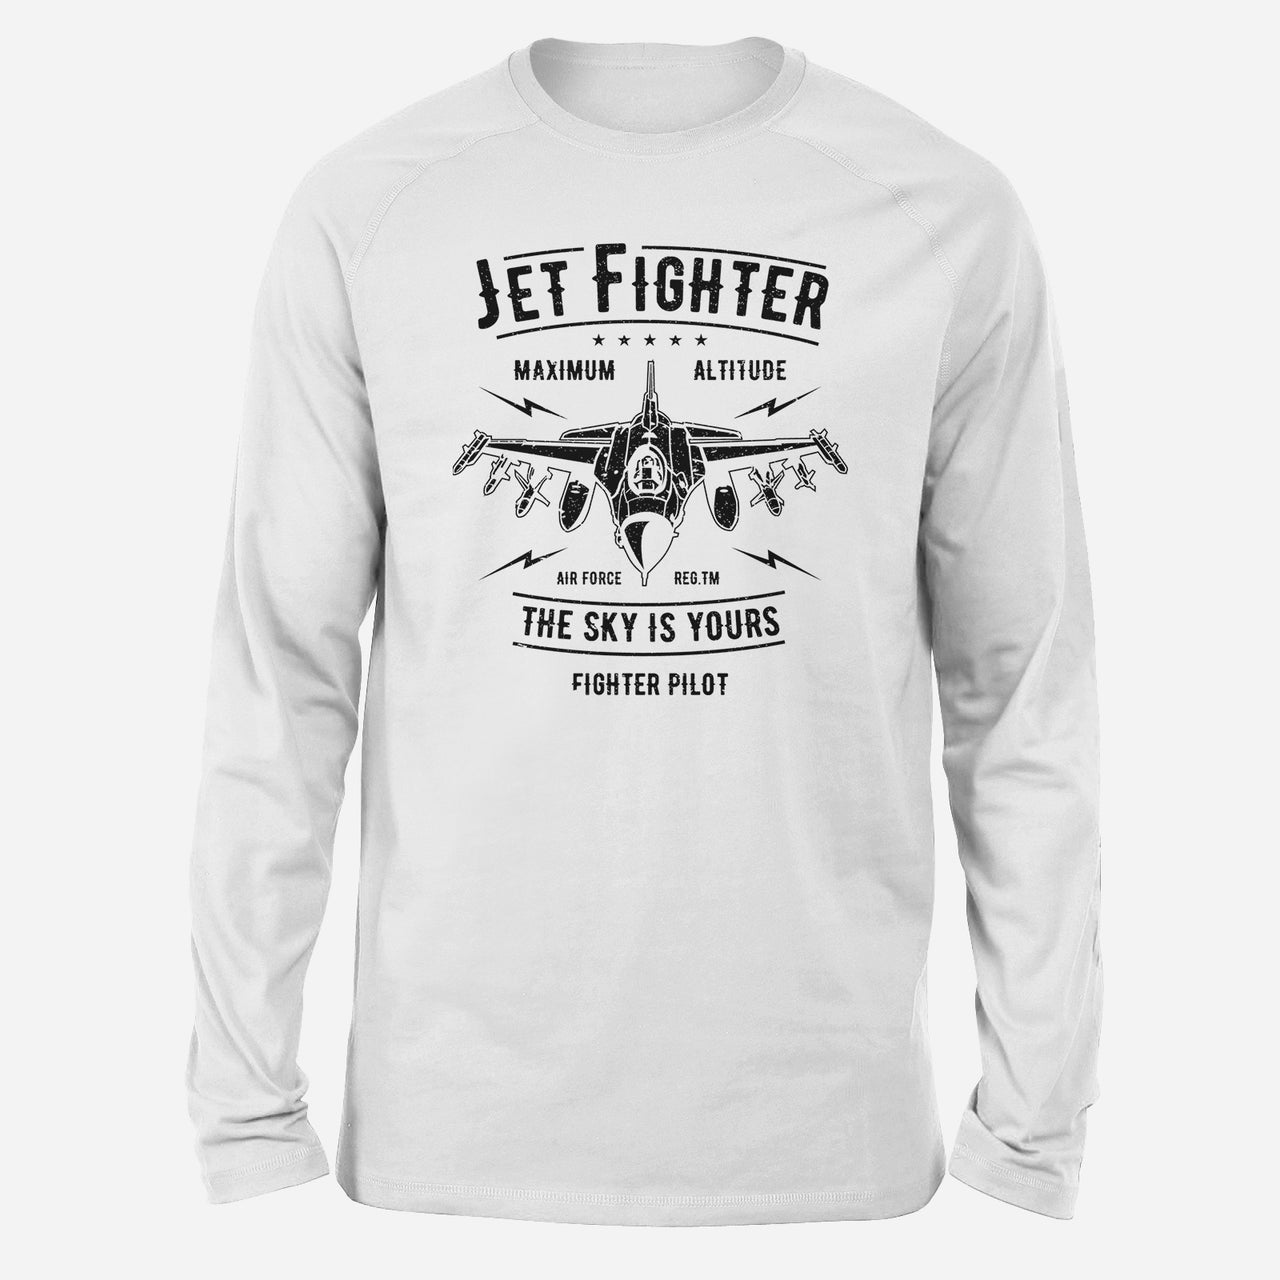 Jet Fighter - The Sky is Yours Designed Long-Sleeve T-Shirts